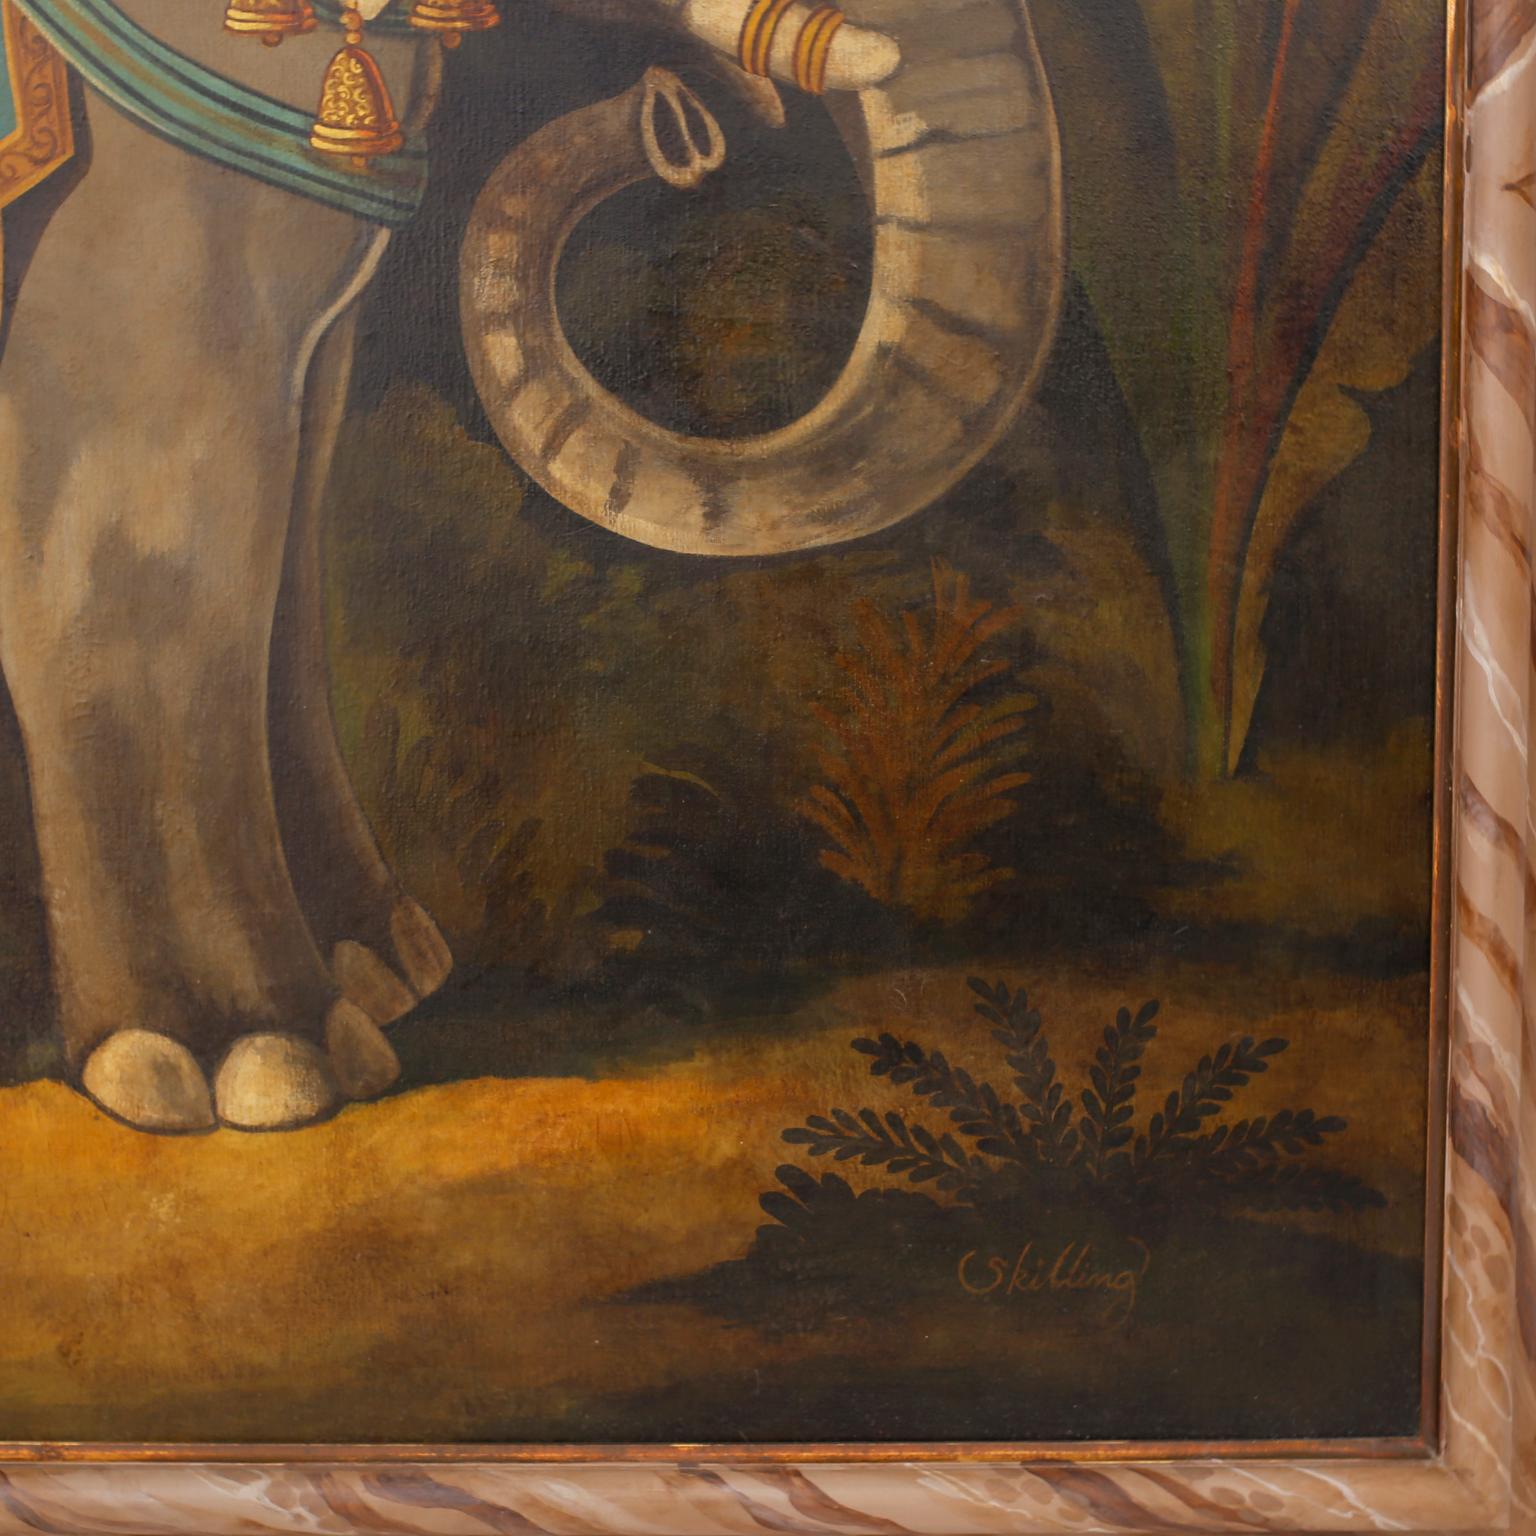 American Oil Painting on Canvas of an Elephant by William Skilling